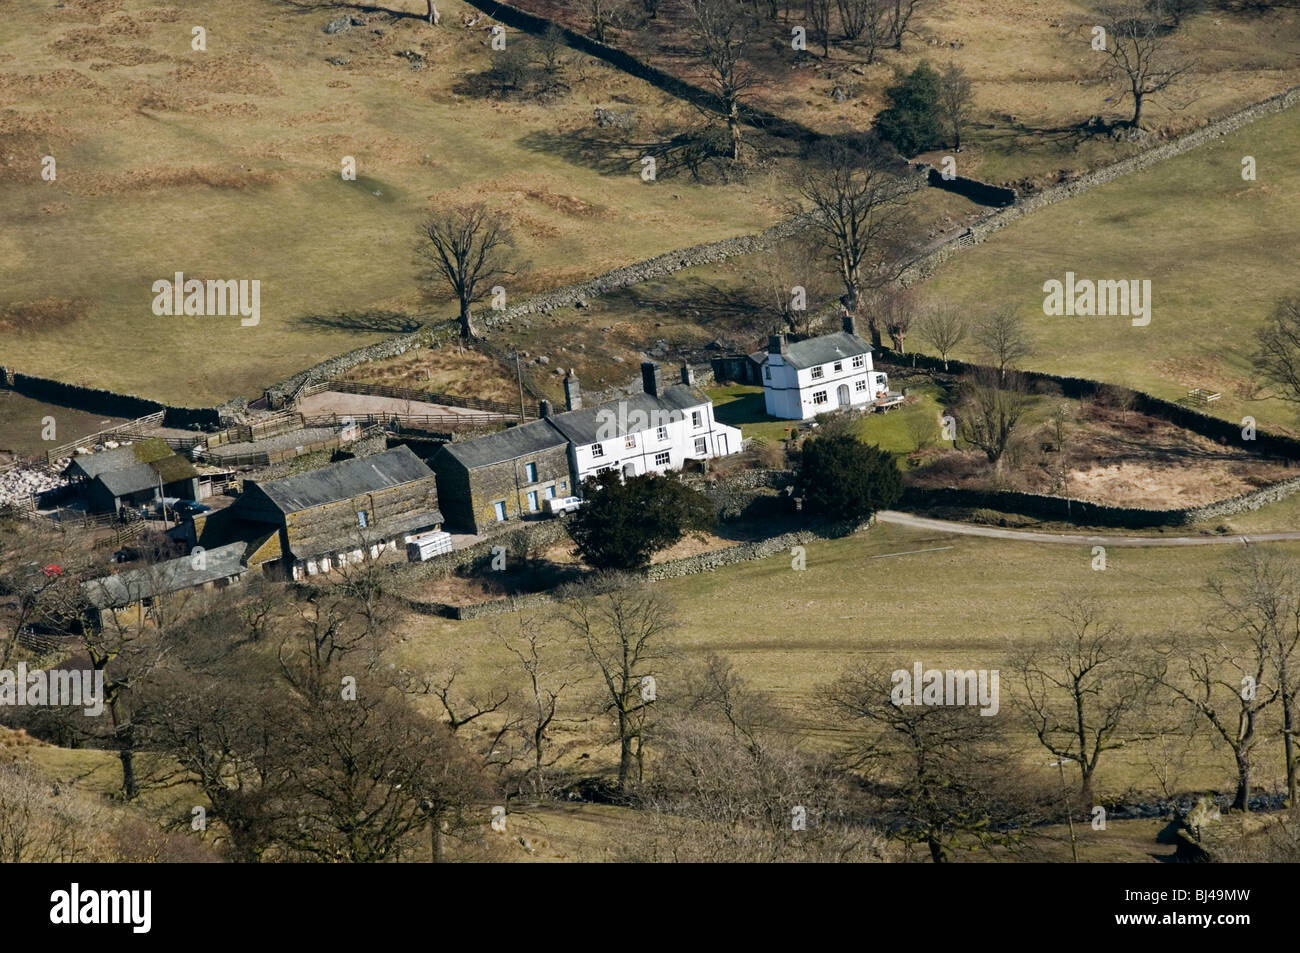 Troutbeck Park Farm, Cumbria in the English Lake District was owned by Beatrix Potter.   PHOTOGRAPHED FROM PUBLIC ROAD. Stock Photo